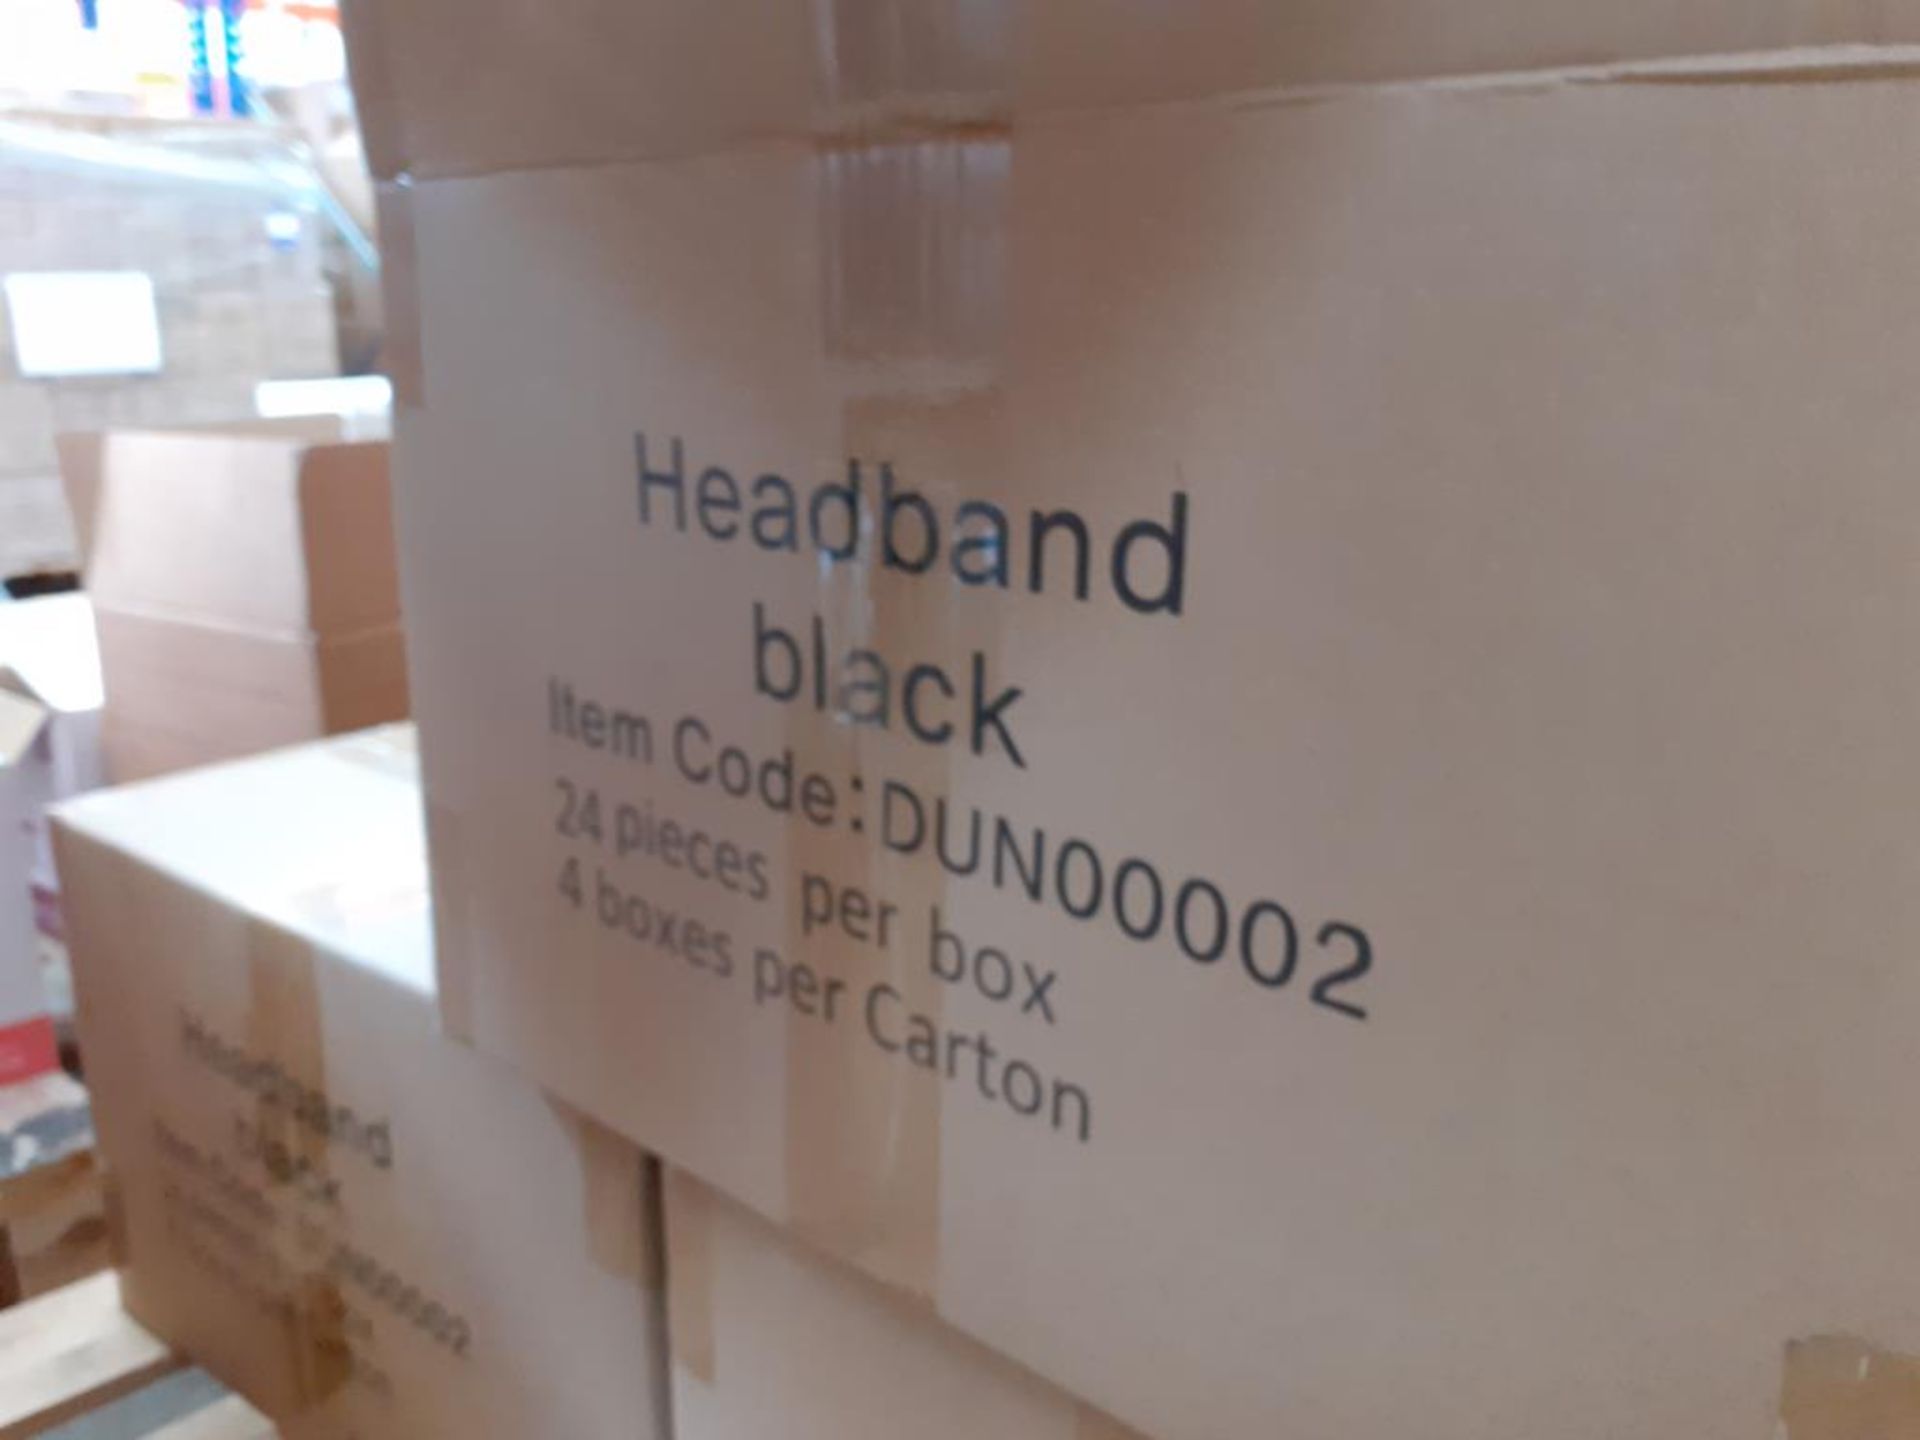 7 x boxes of Cotton Wool Balls and 3 x boxes of black Head Bands - Image 6 of 7